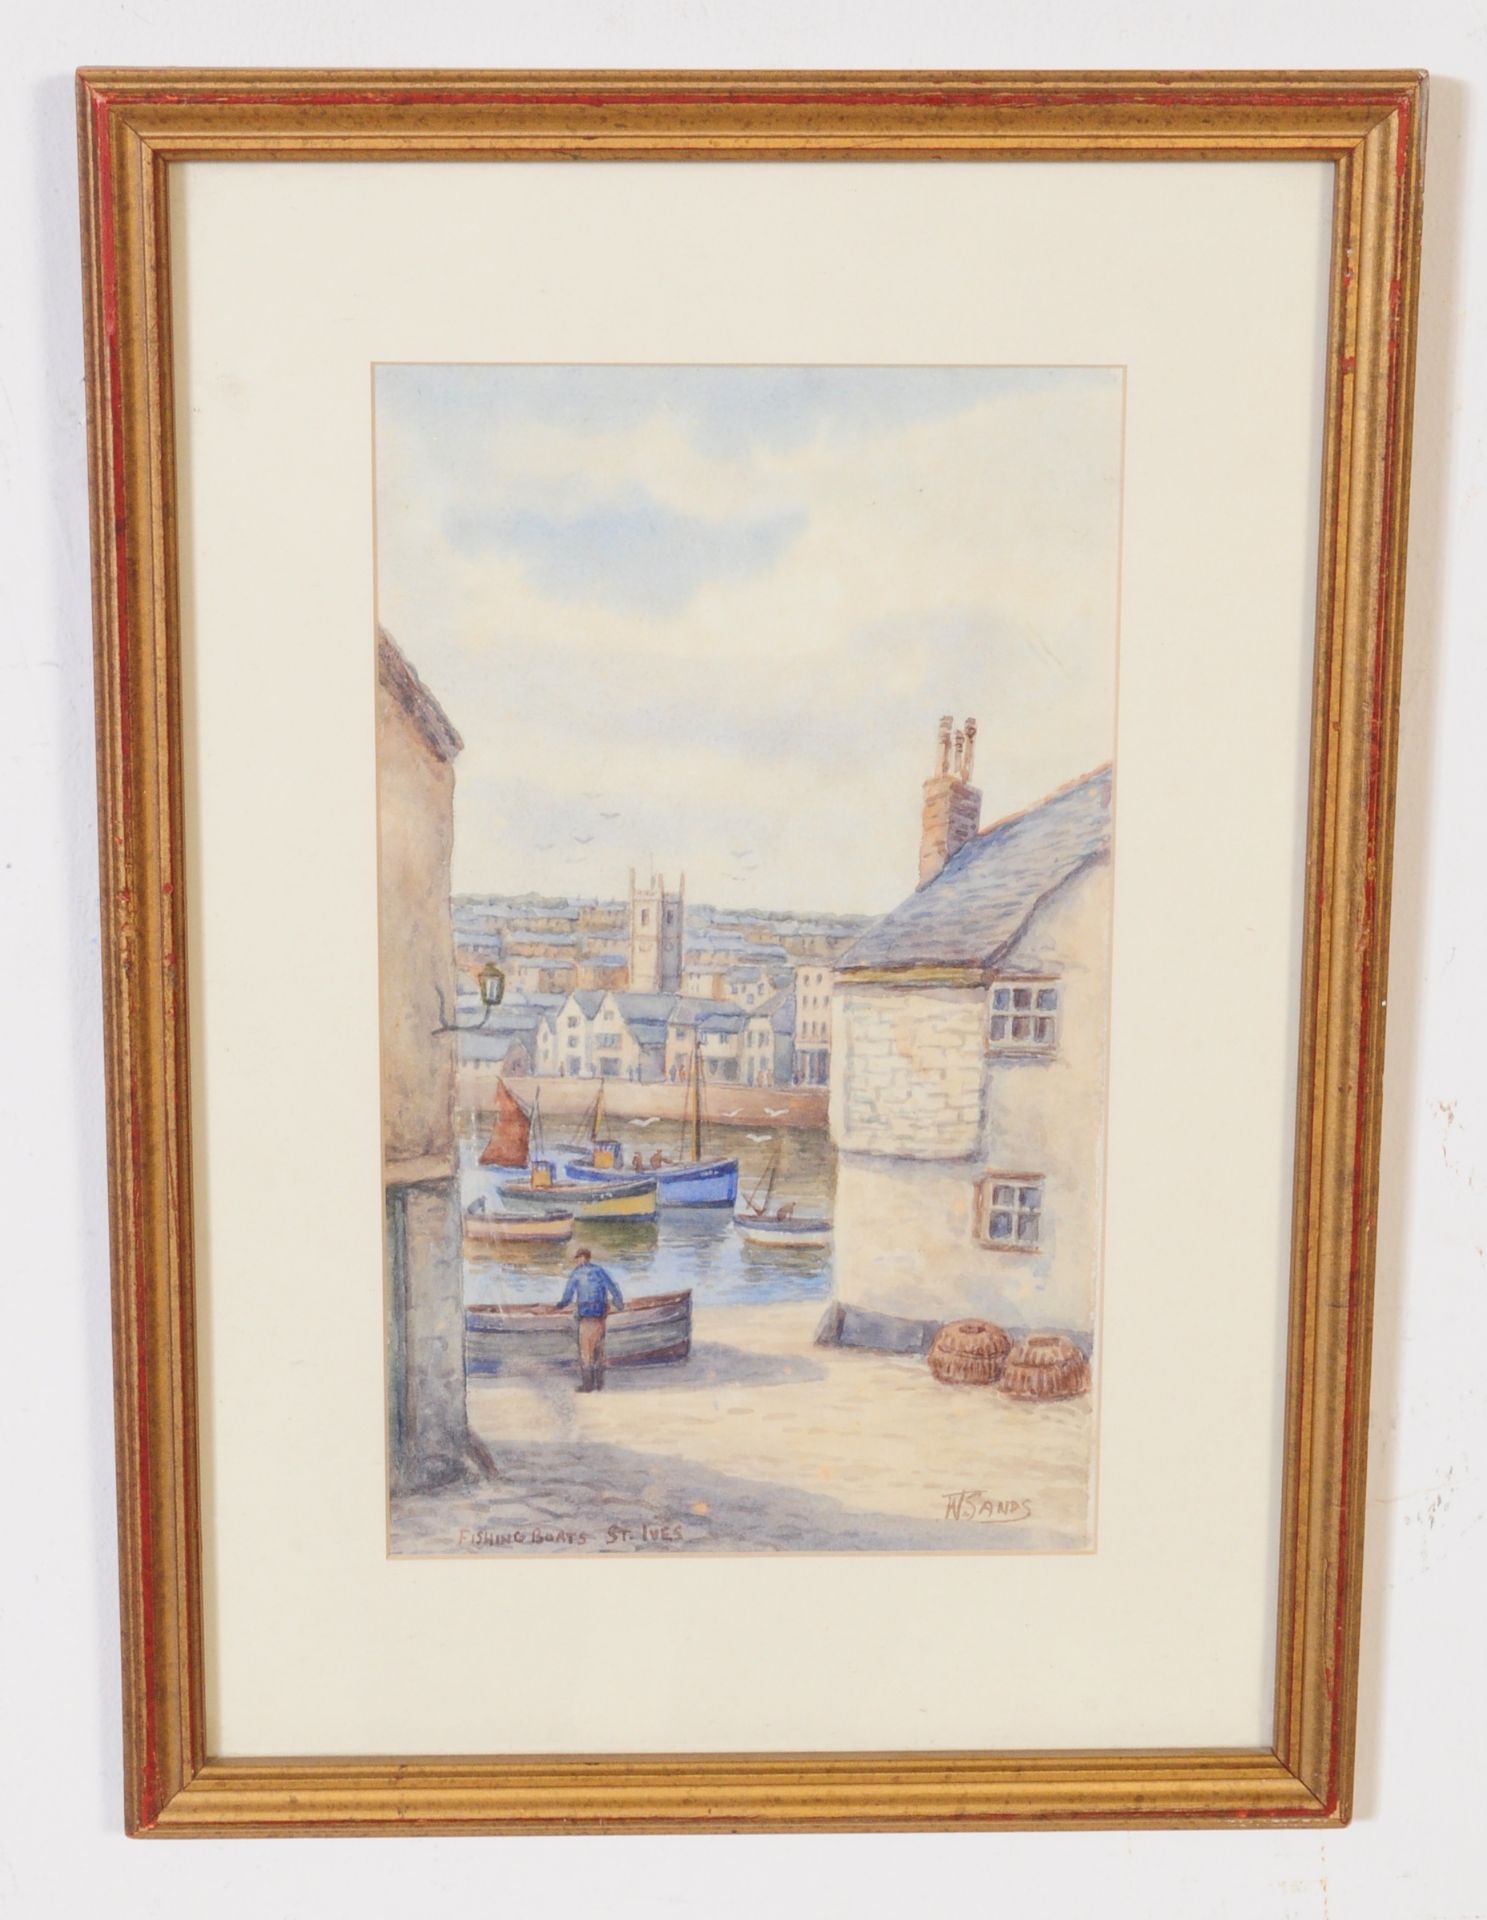 W. SANDS (1894 - 1980) - EARLY 20TH CENTURY WATERCOLOUR PAINTING